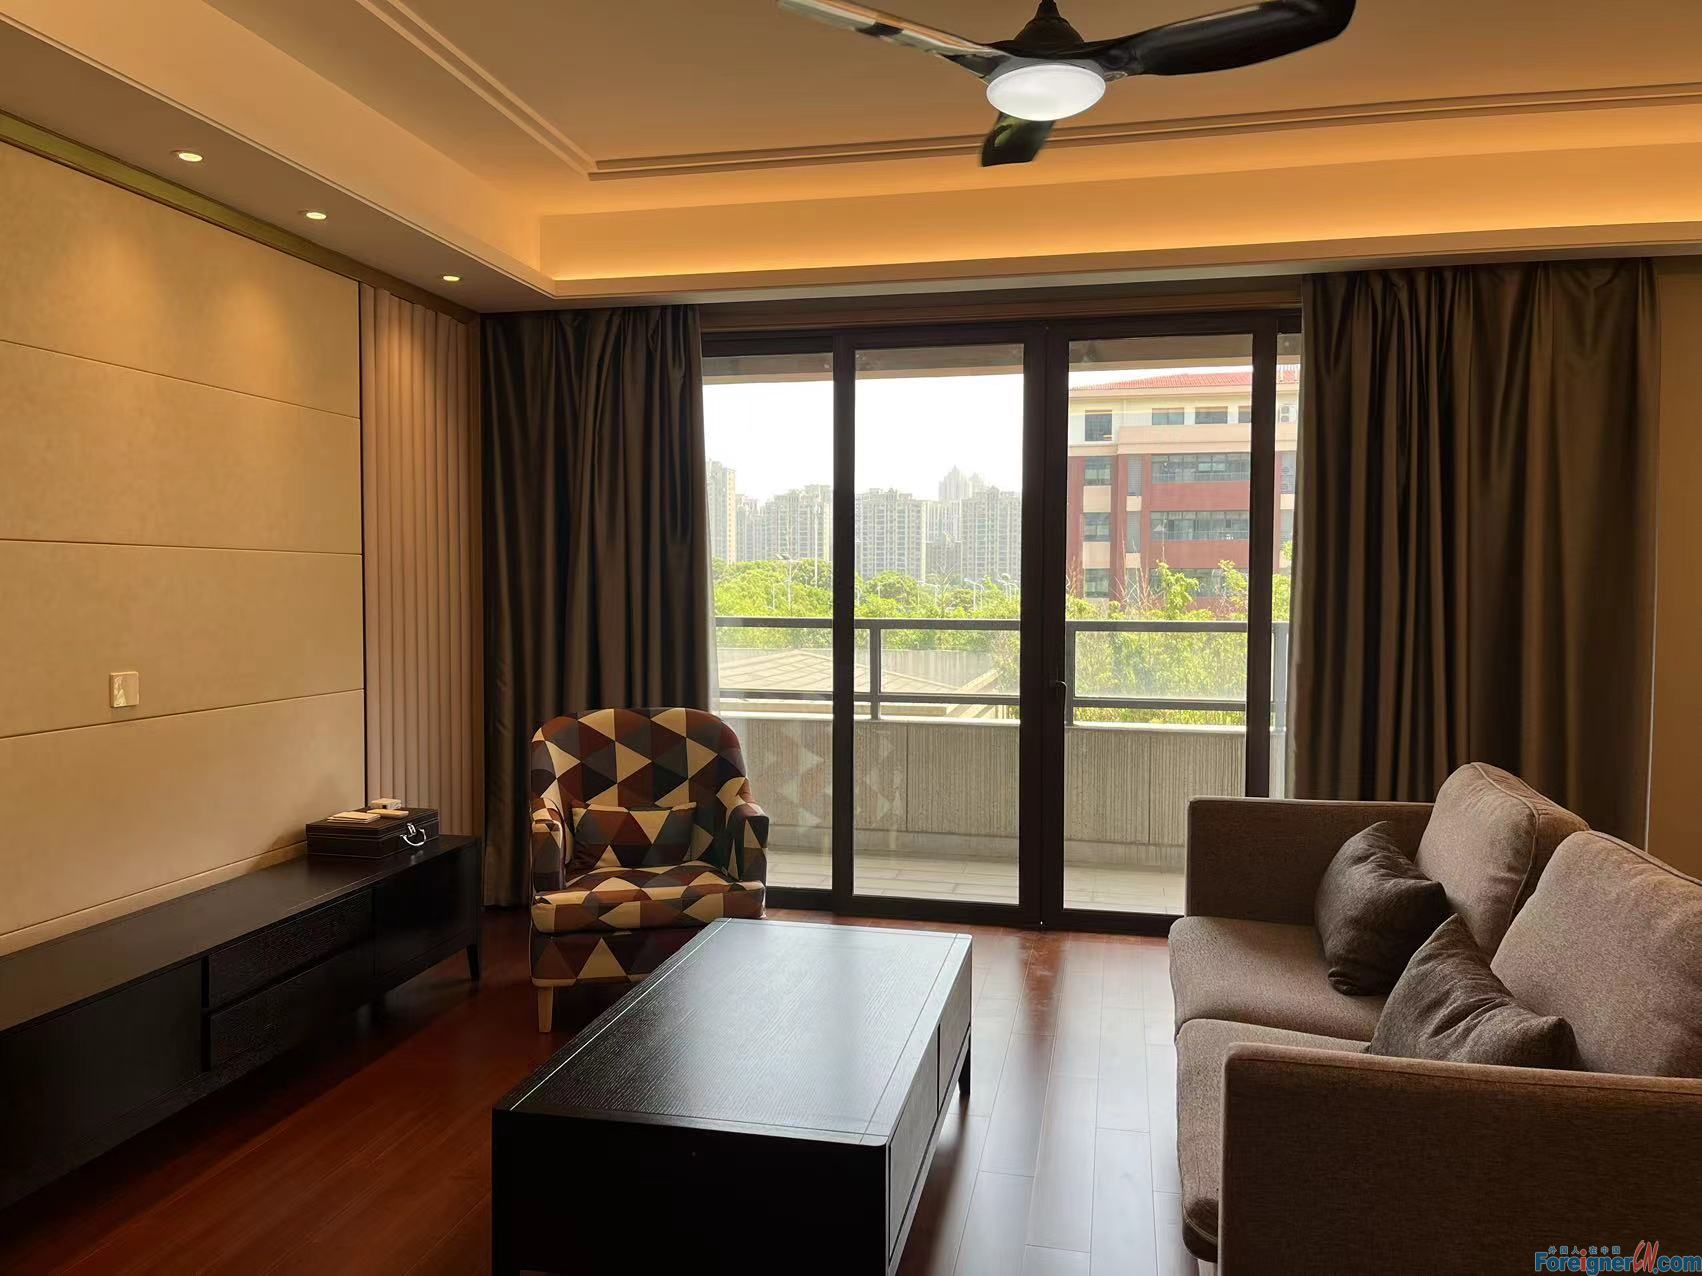 Modern!!! Park Mansion apartment for Expats in SIP,Suzhou / bright terrace/Central AC ,Floor heating/Aeon Shopping Center/Subway station,Baitang Garden